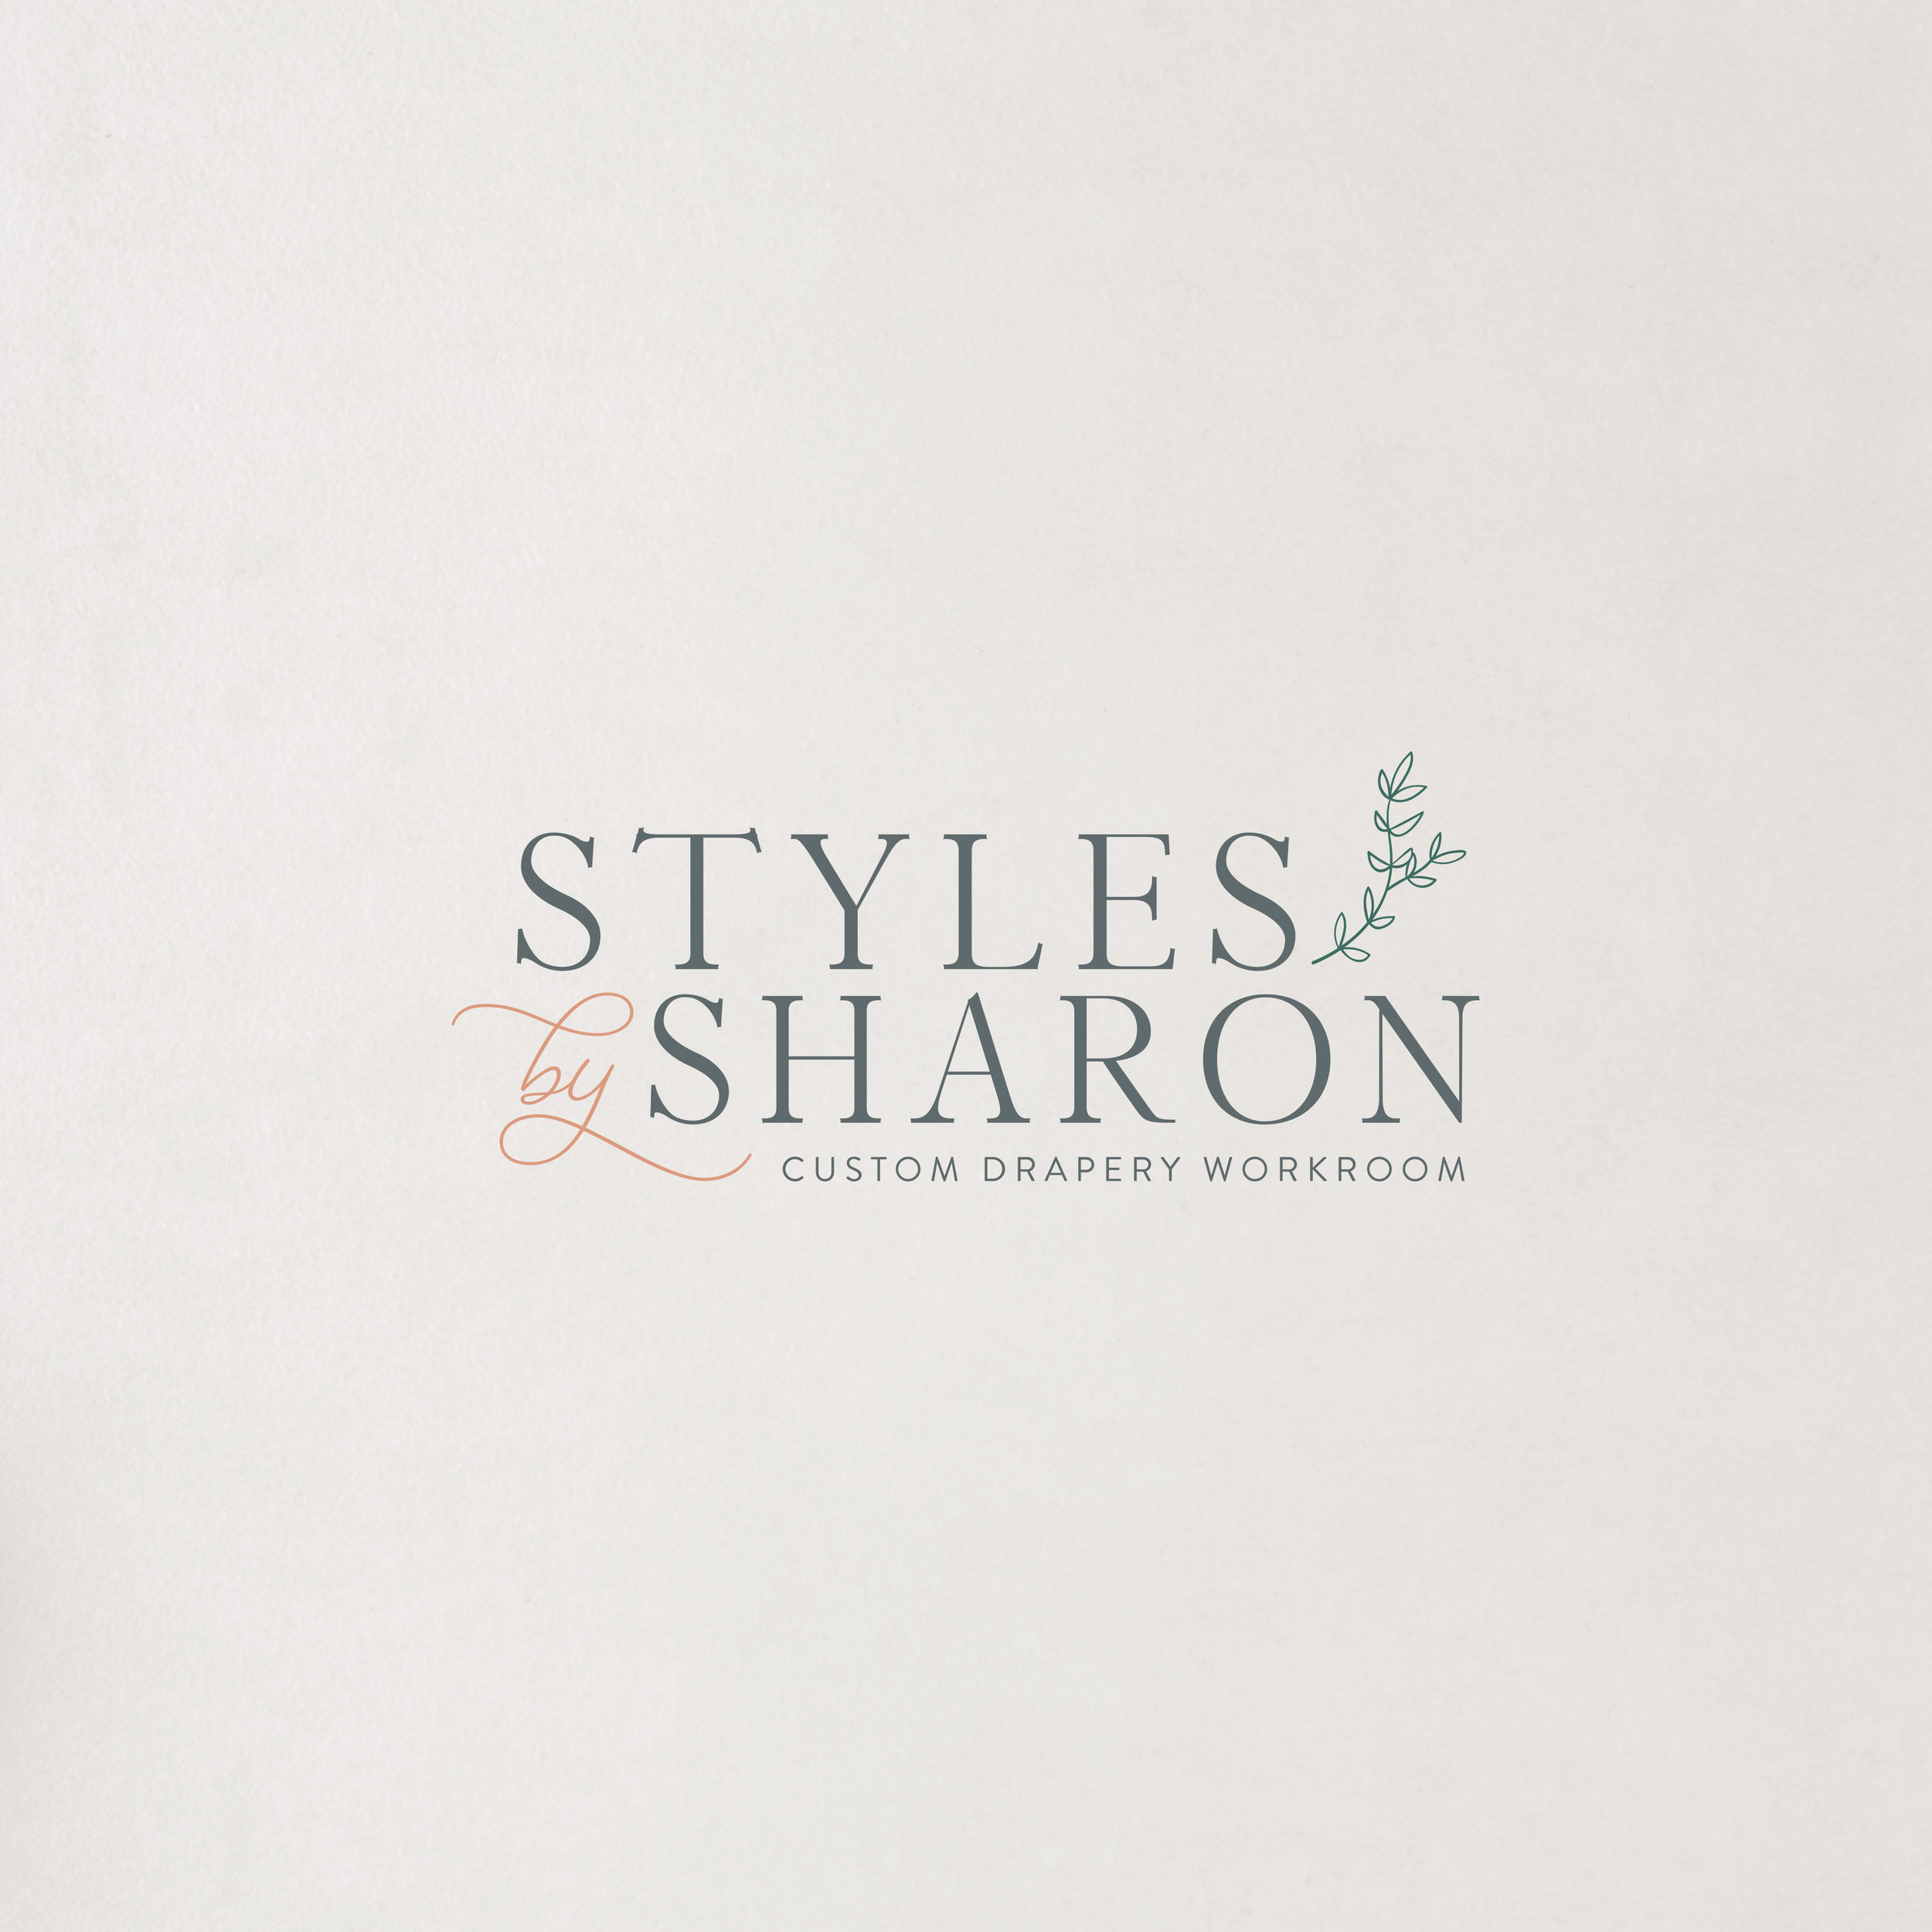 Styles by Sharon | Branding by Jula Paper Co.